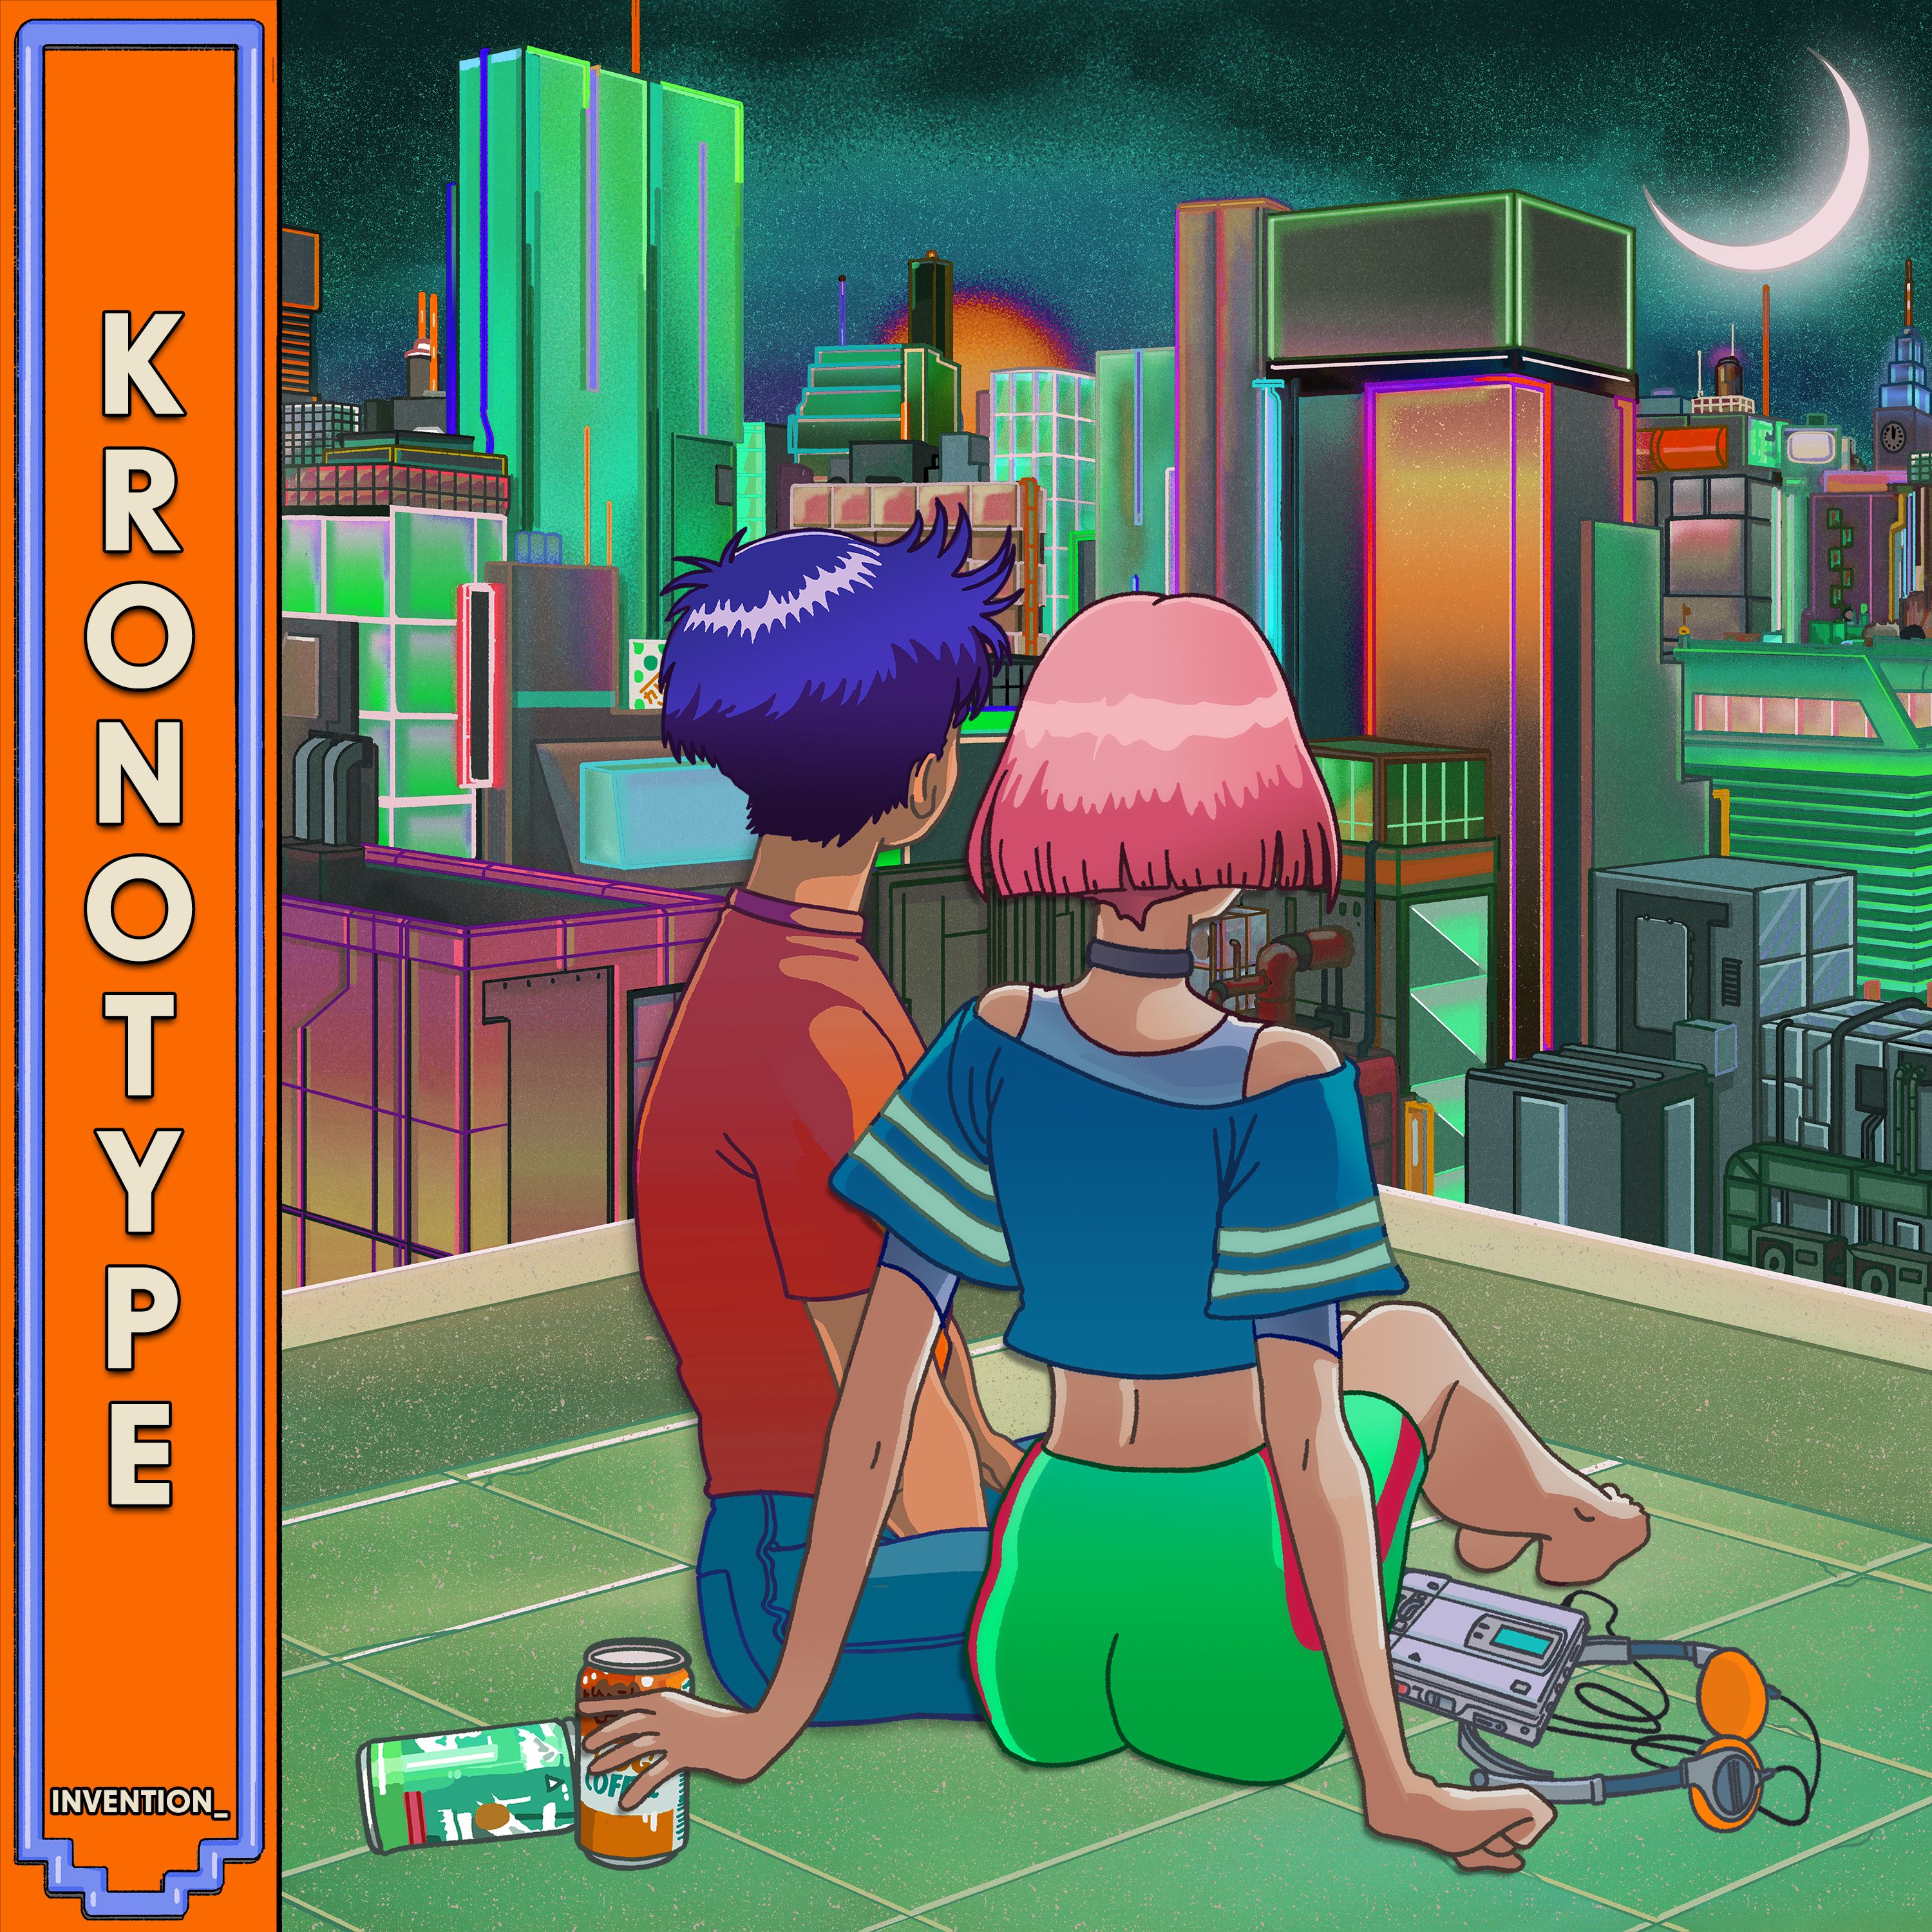 I-download invention_  - Kronotype